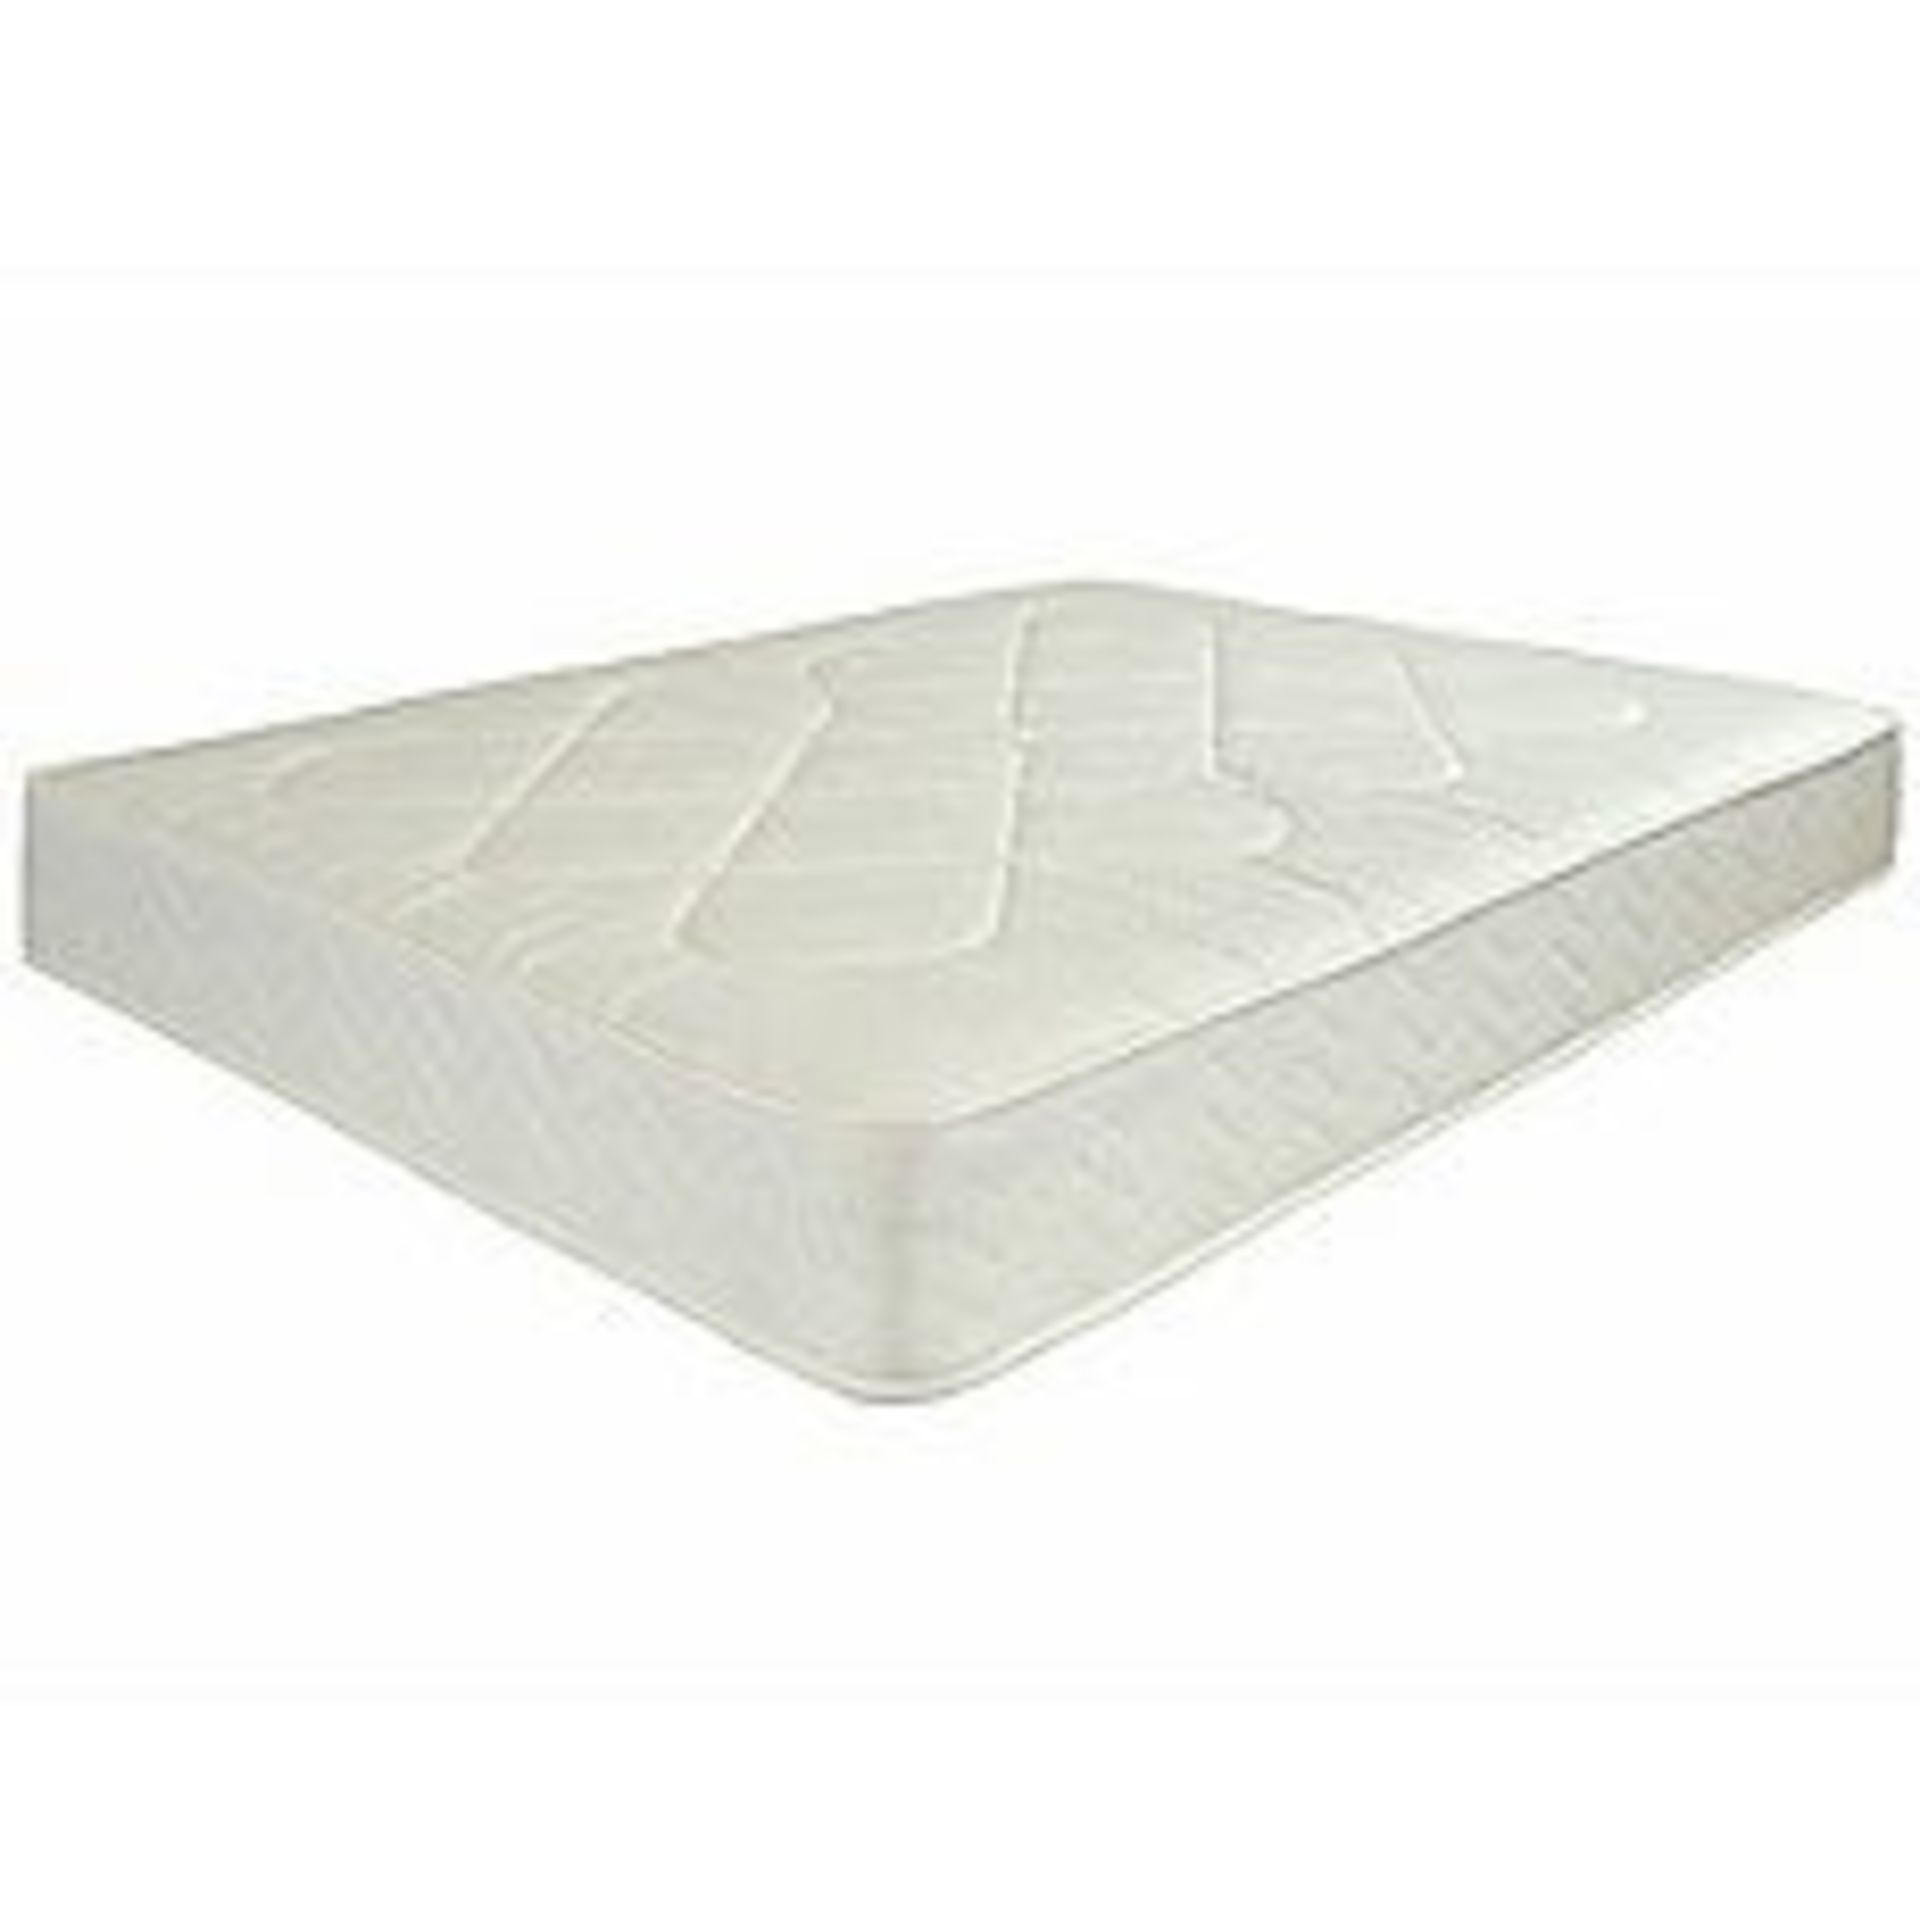 1 GRADE A BAGGED UNBRANDED POCKET SPRUNG MATTRESS / KING - 5FT / RRP £350.00 (VIEWING HIGHLY